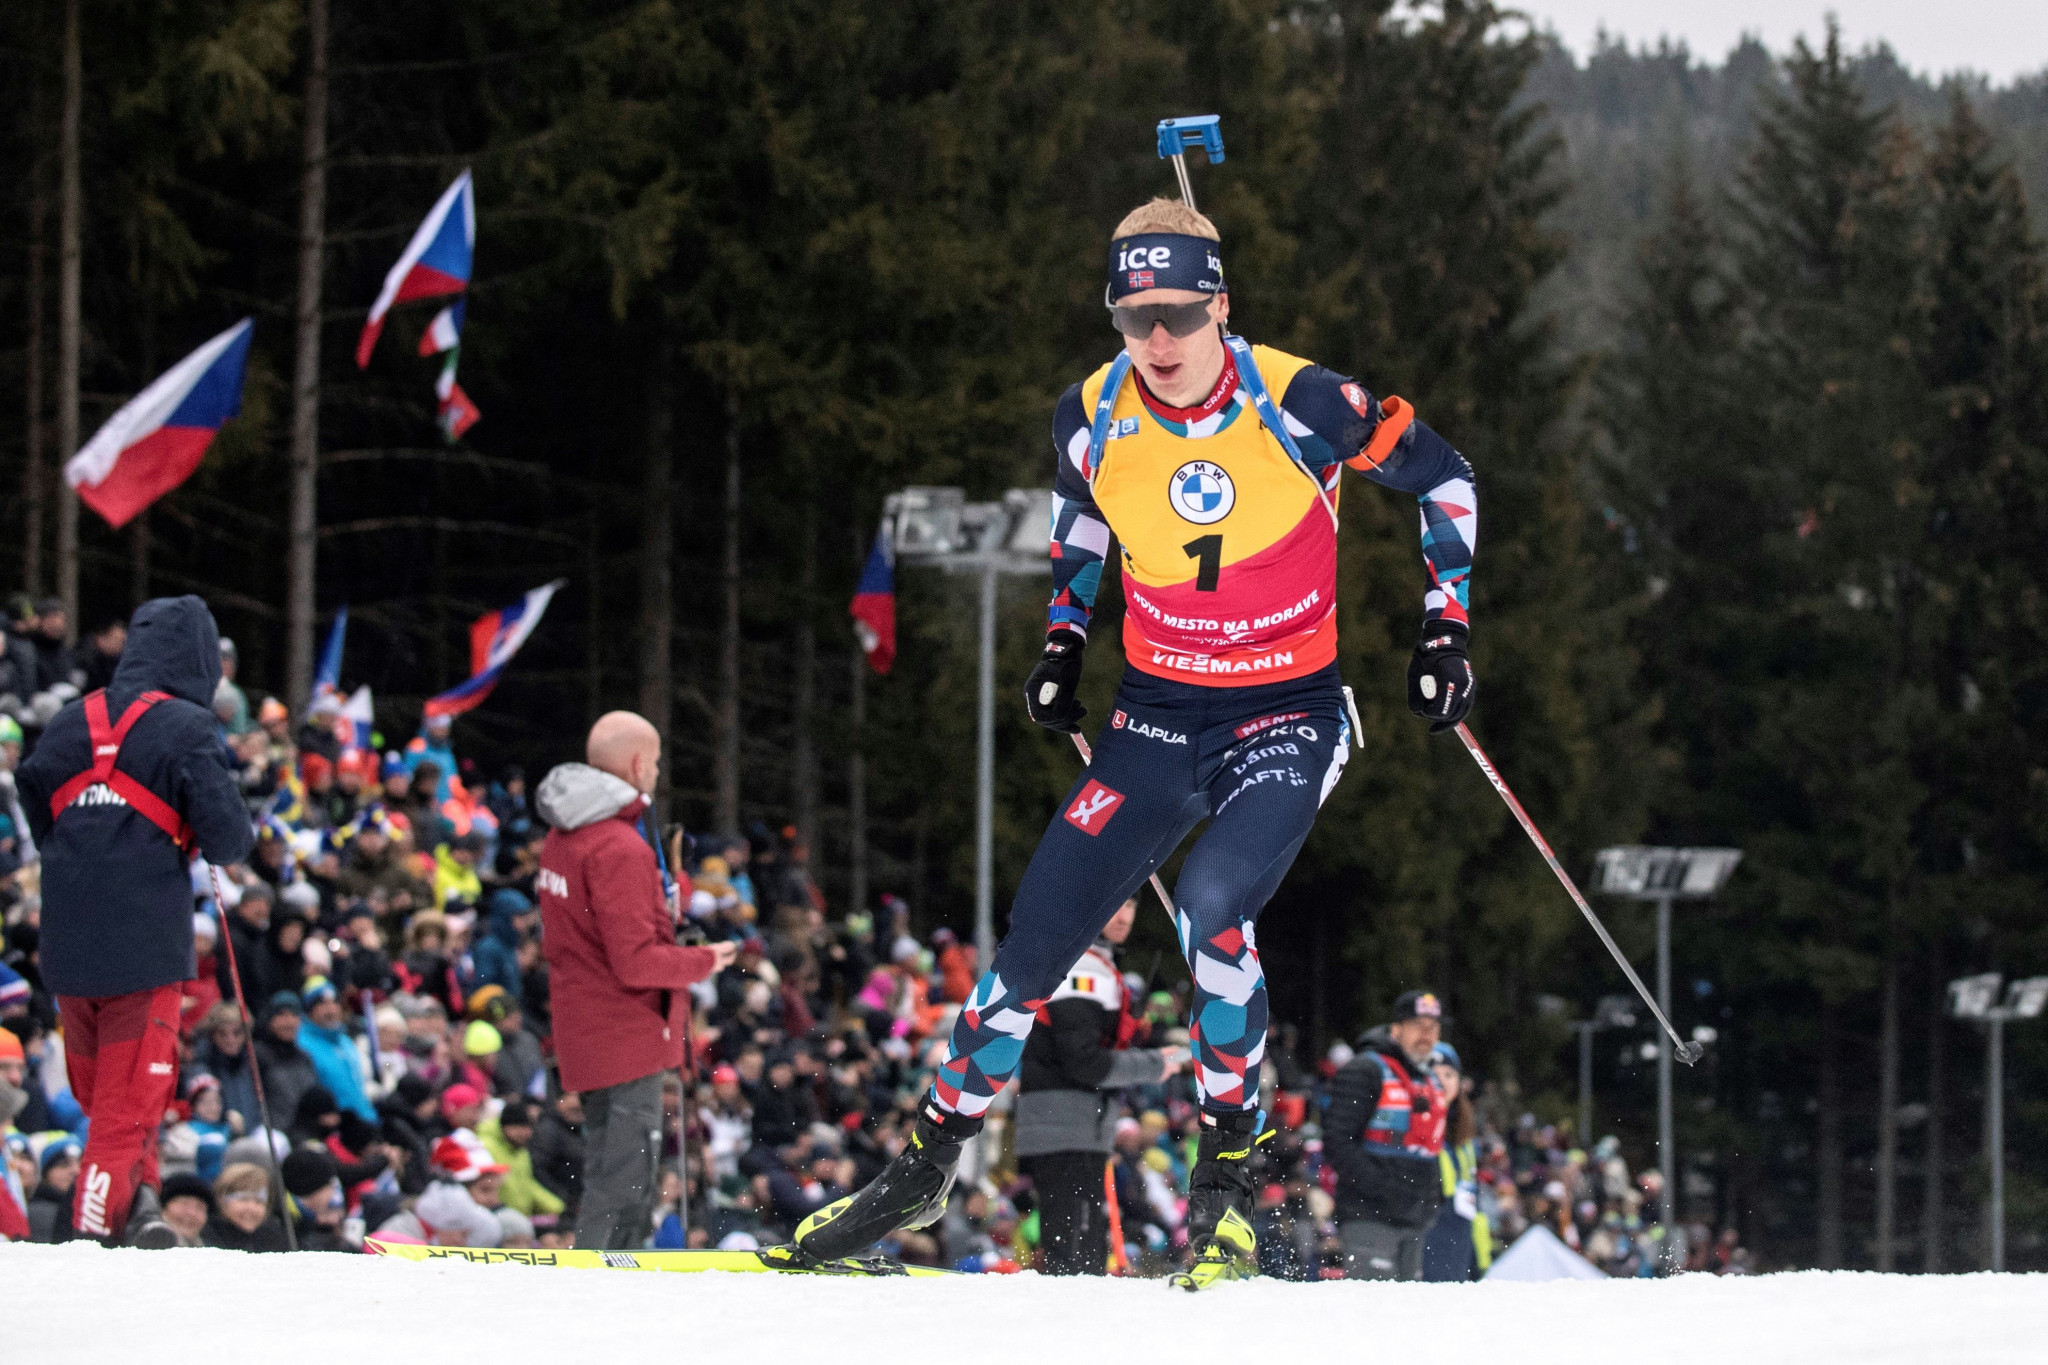 Johannes Thingnes Bø claimed his 16th World Cup title today in the Czech Republic ©Getty Images